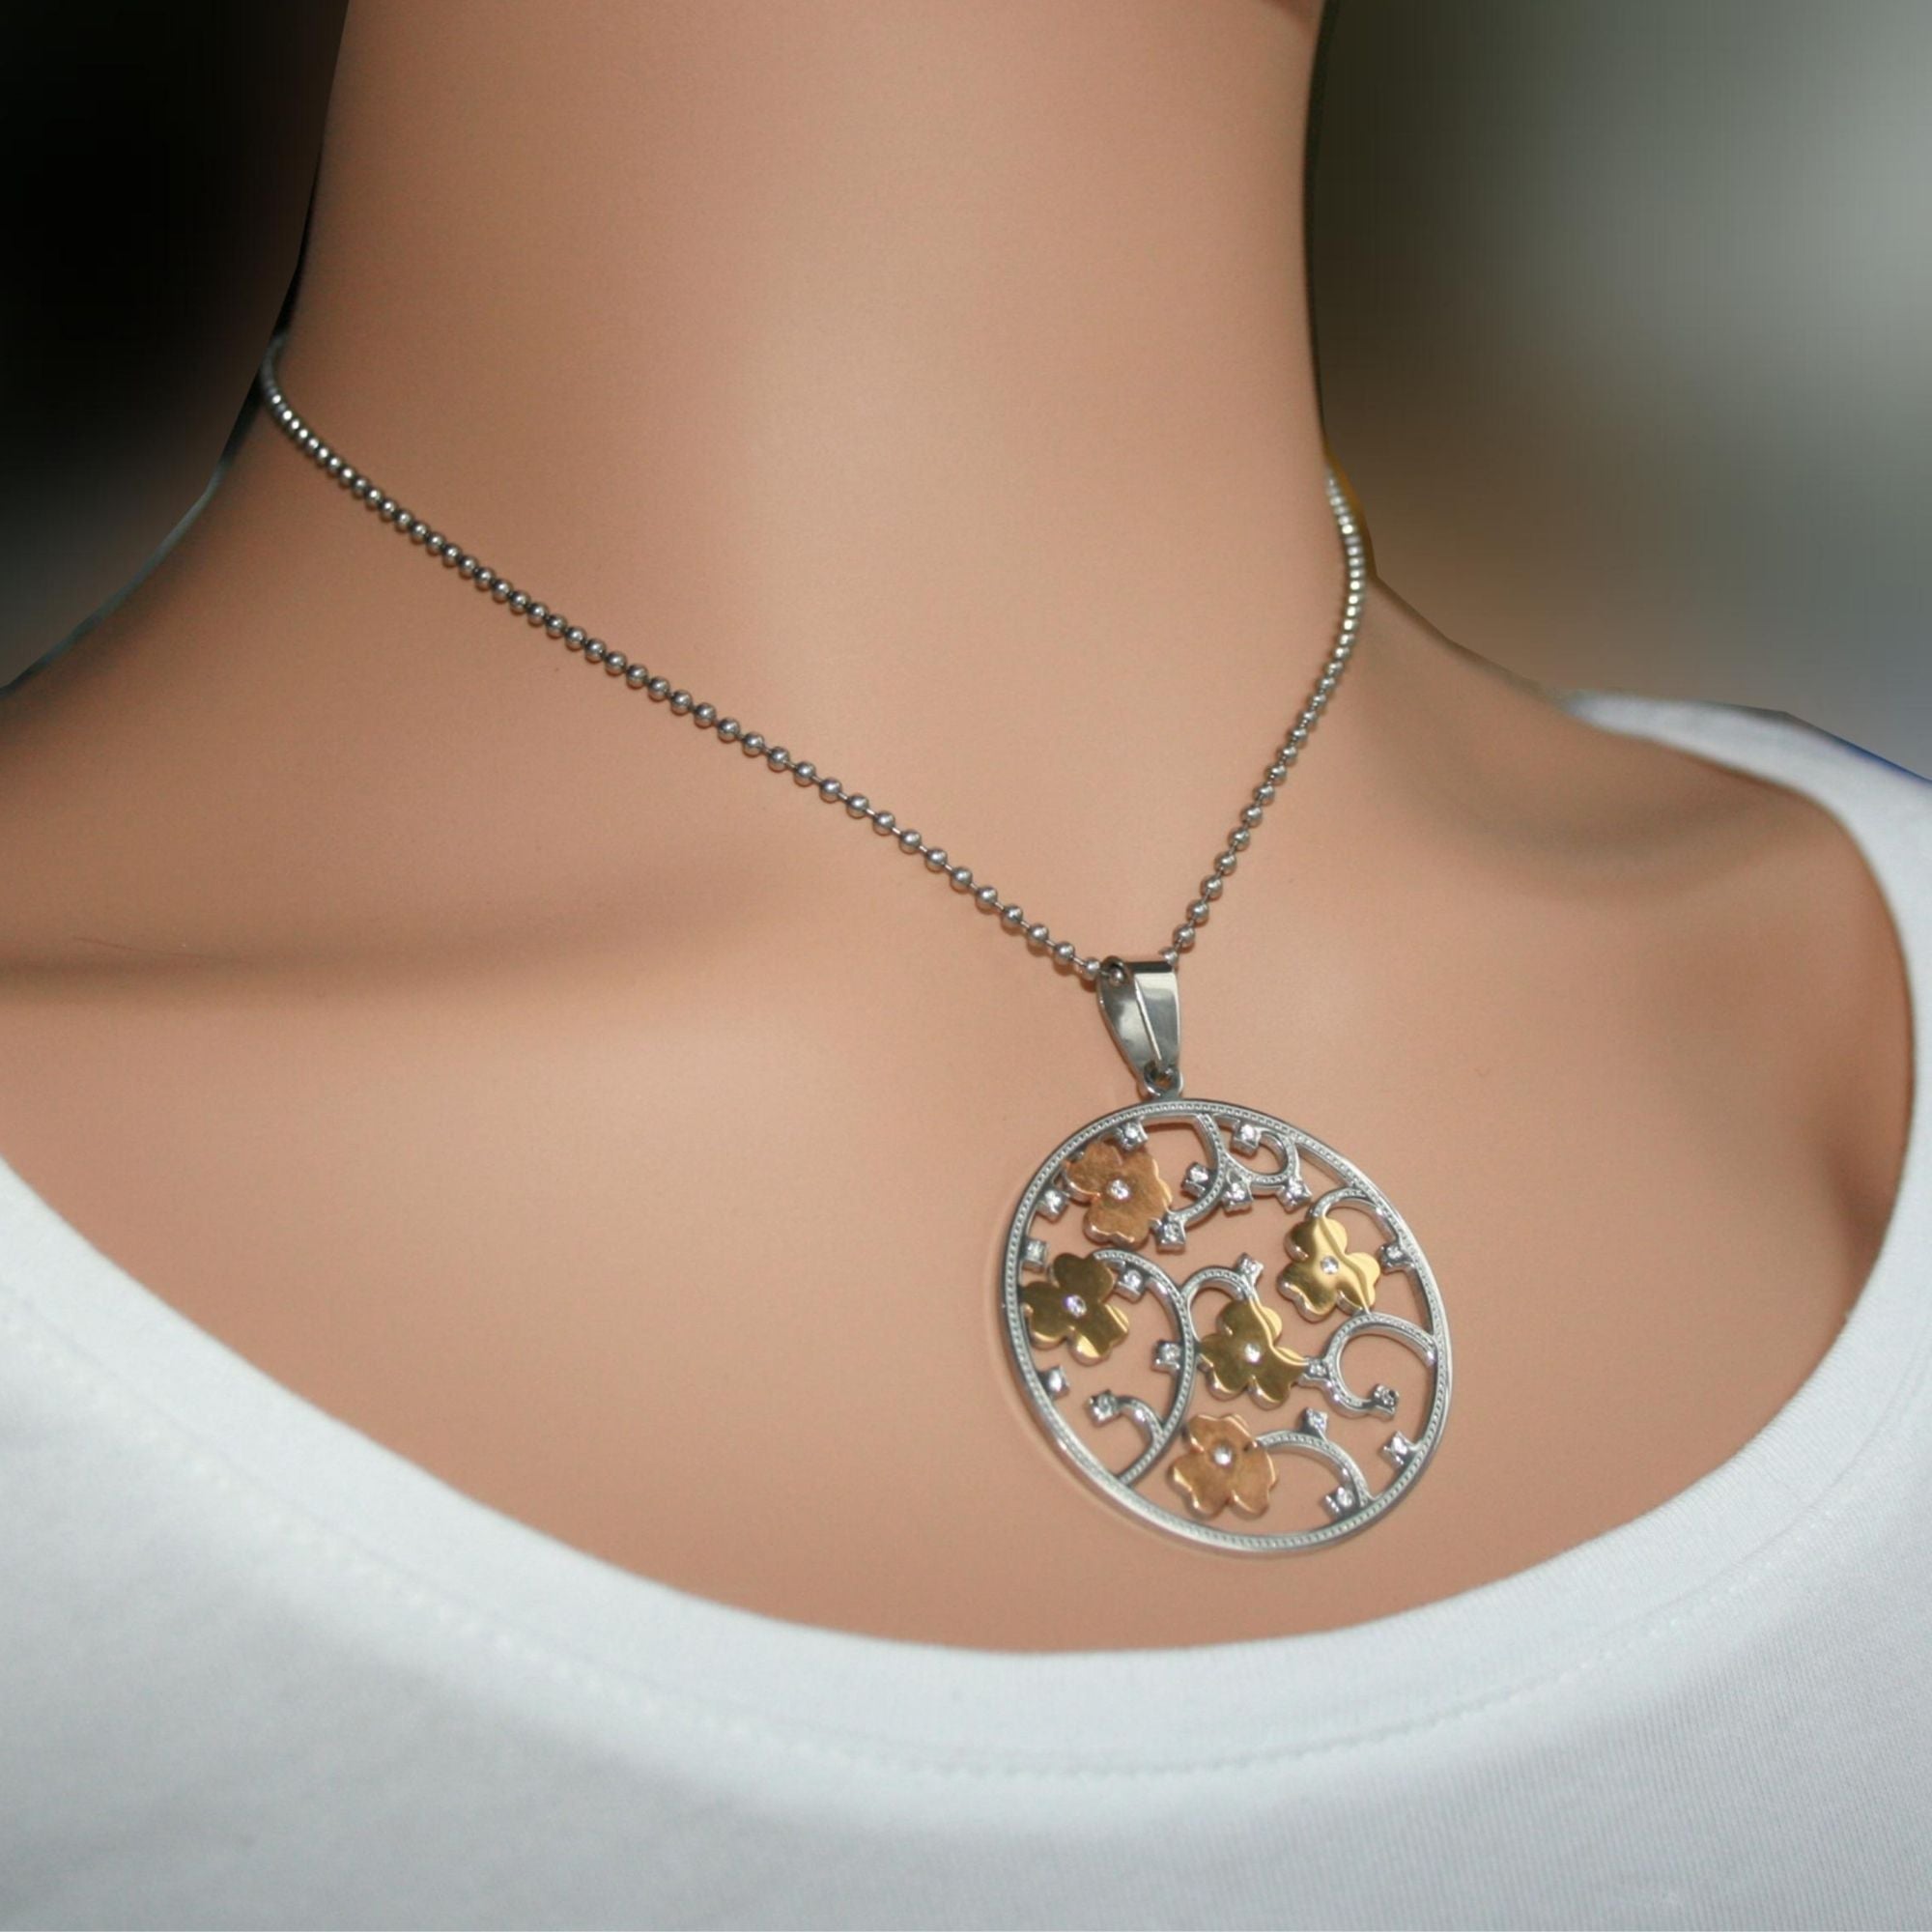 Stainless Steel Two Tone Flower Pendant